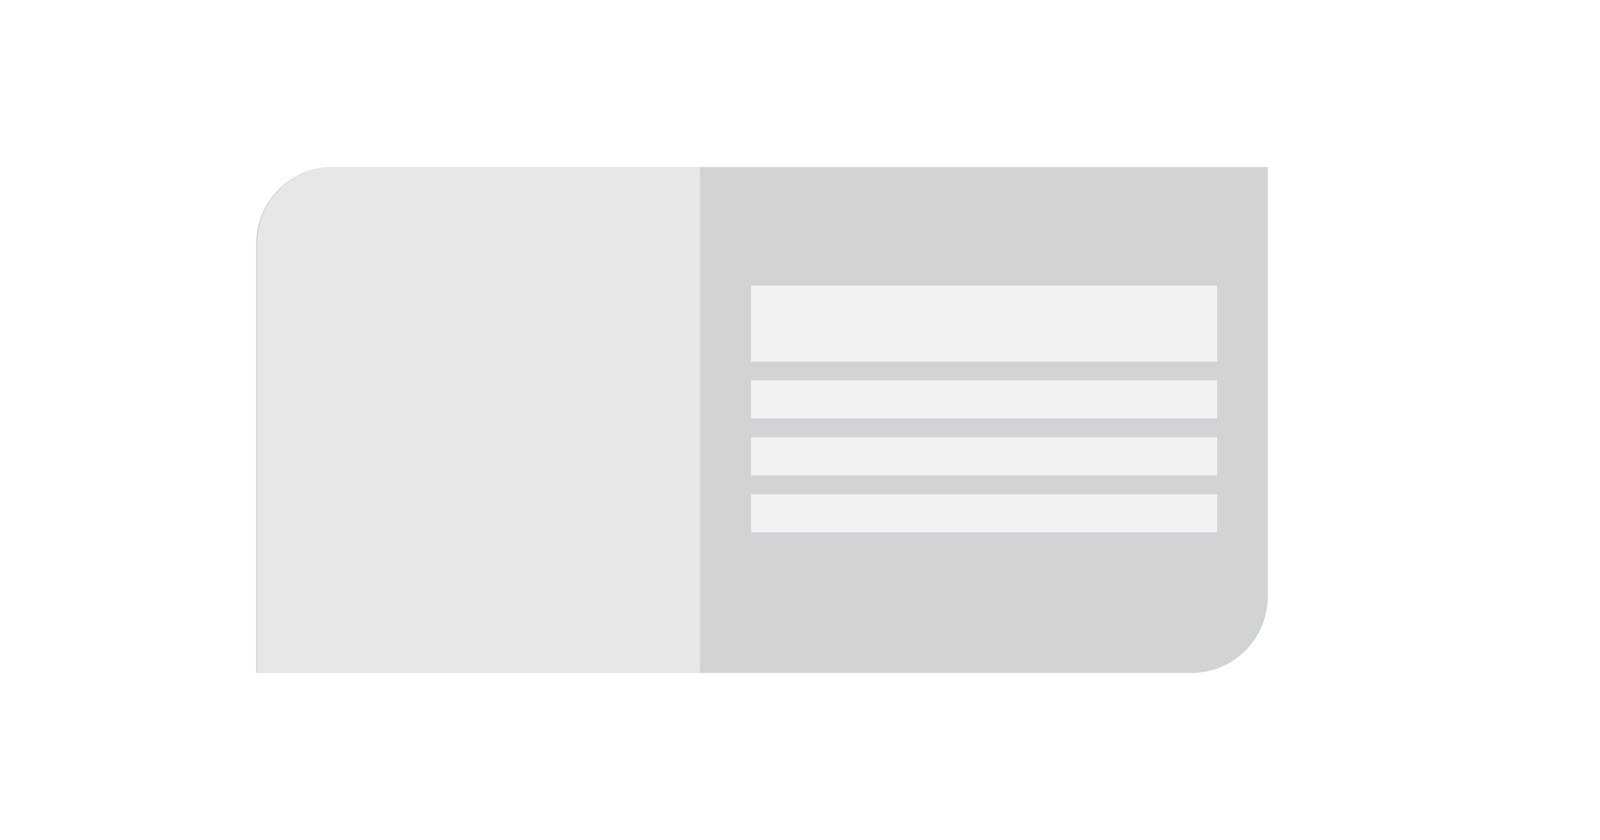 Building simple CSS cards that have transitions